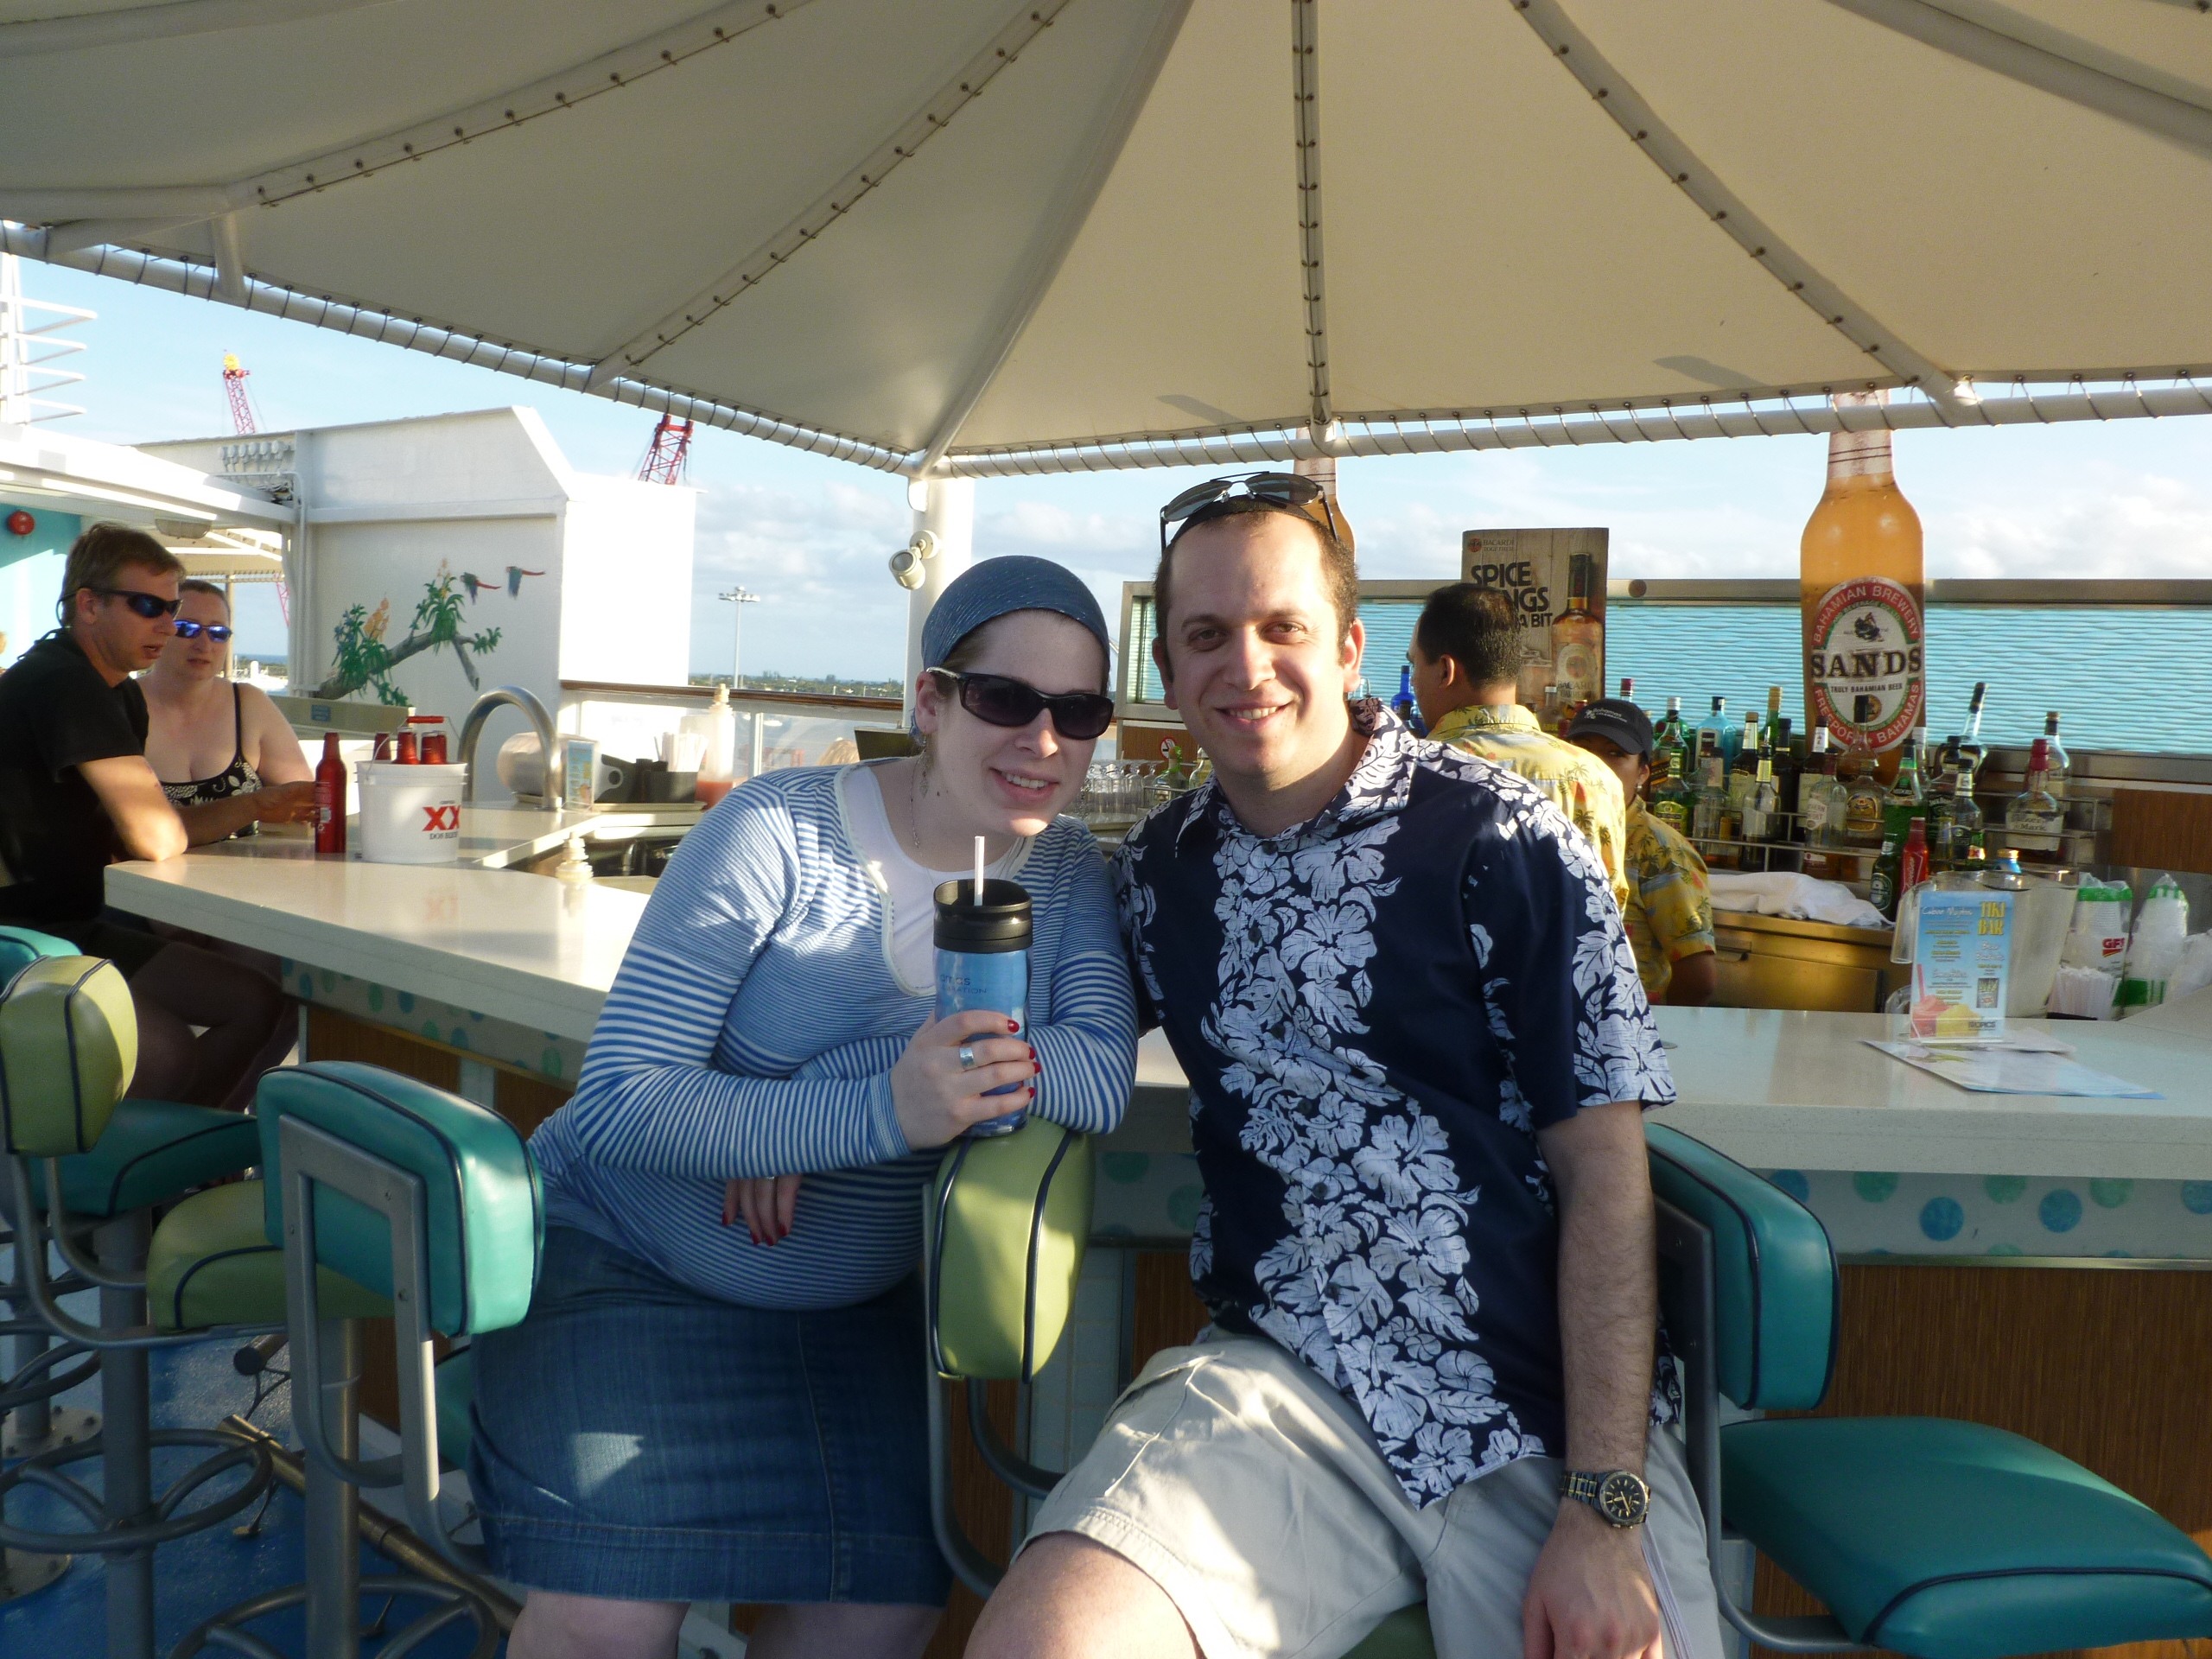 My wife and I on the cruise